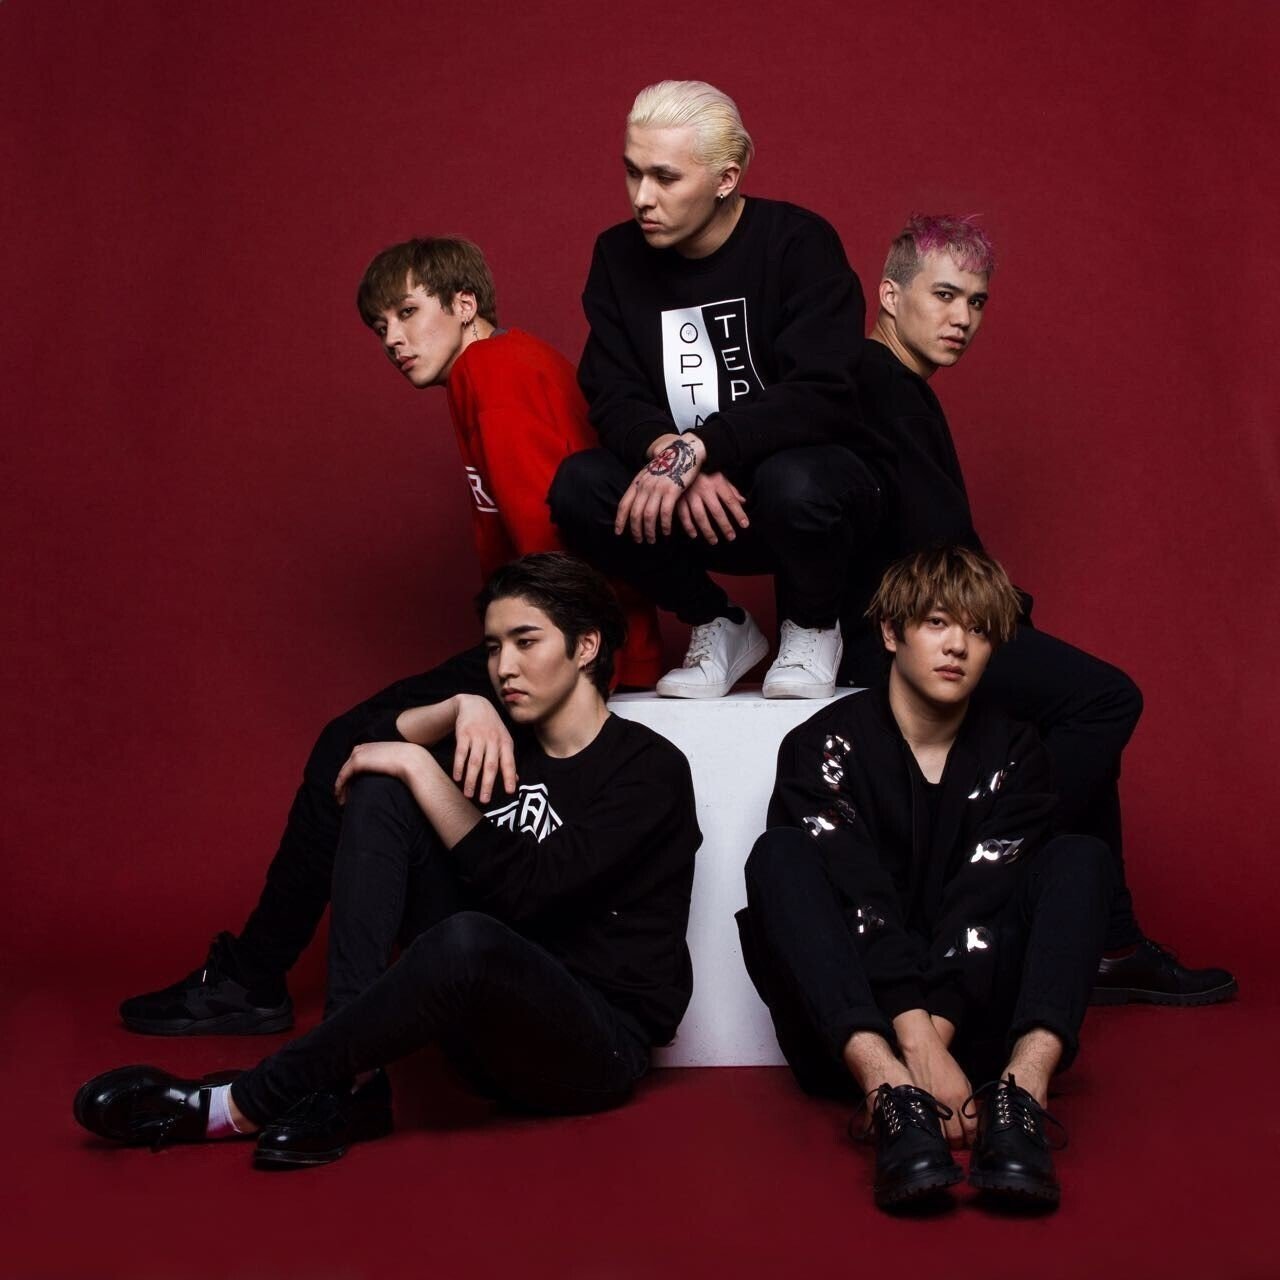 Boy band Ninety One from Kazakhstan were the pioneers of the Q-pop genre – pop sung in Kazakh – with the release of their debut song, Ayptama, in 2015.